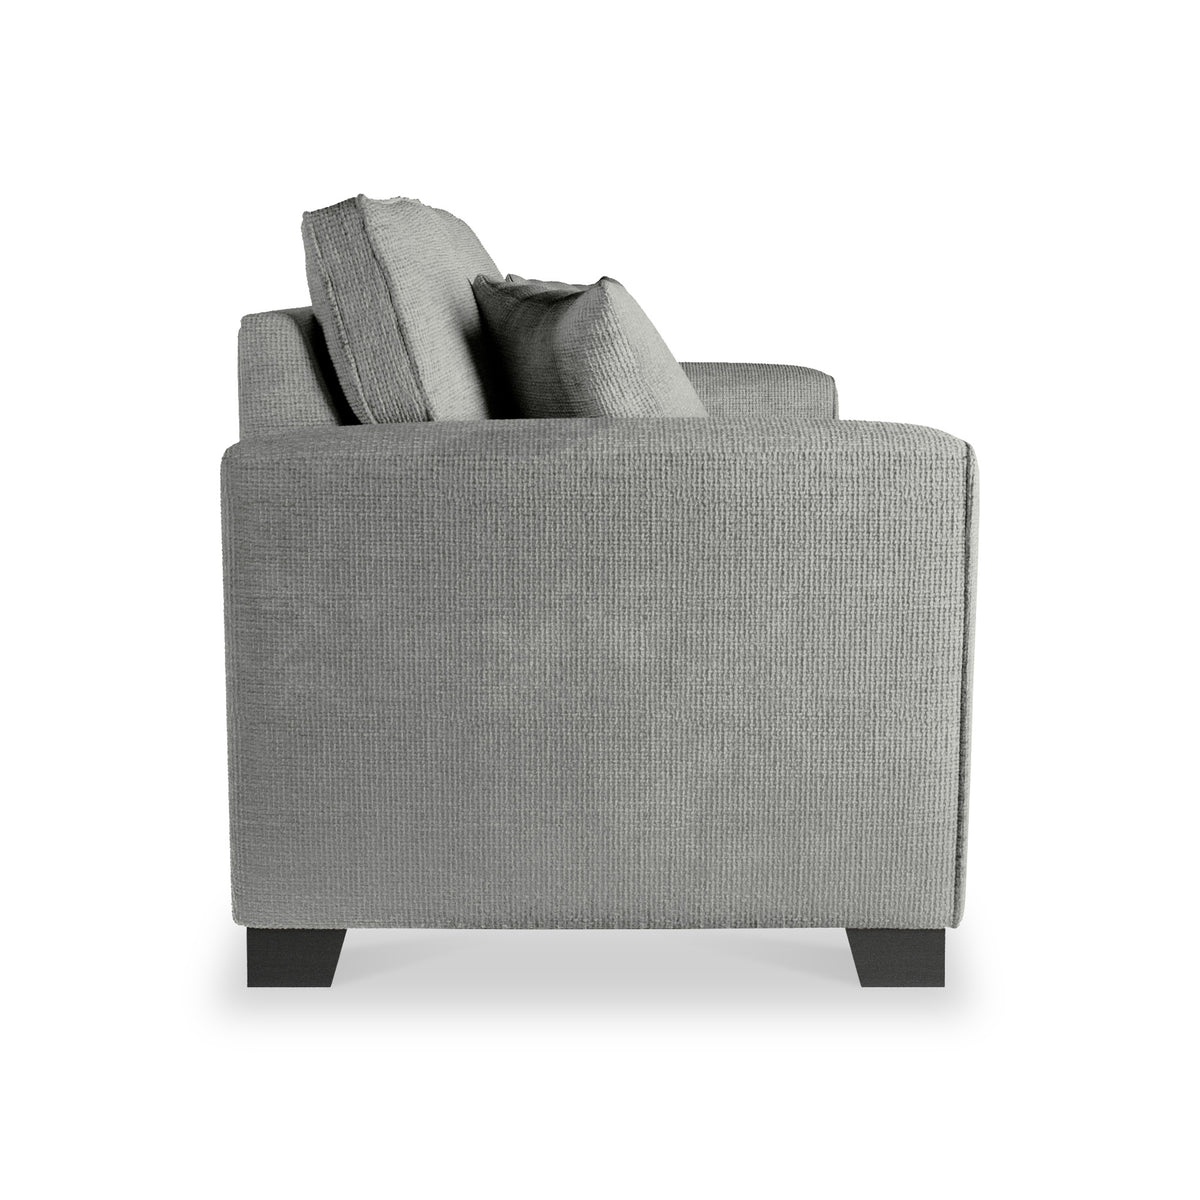 Chester Silver Hopsack 3 Seater Sofa